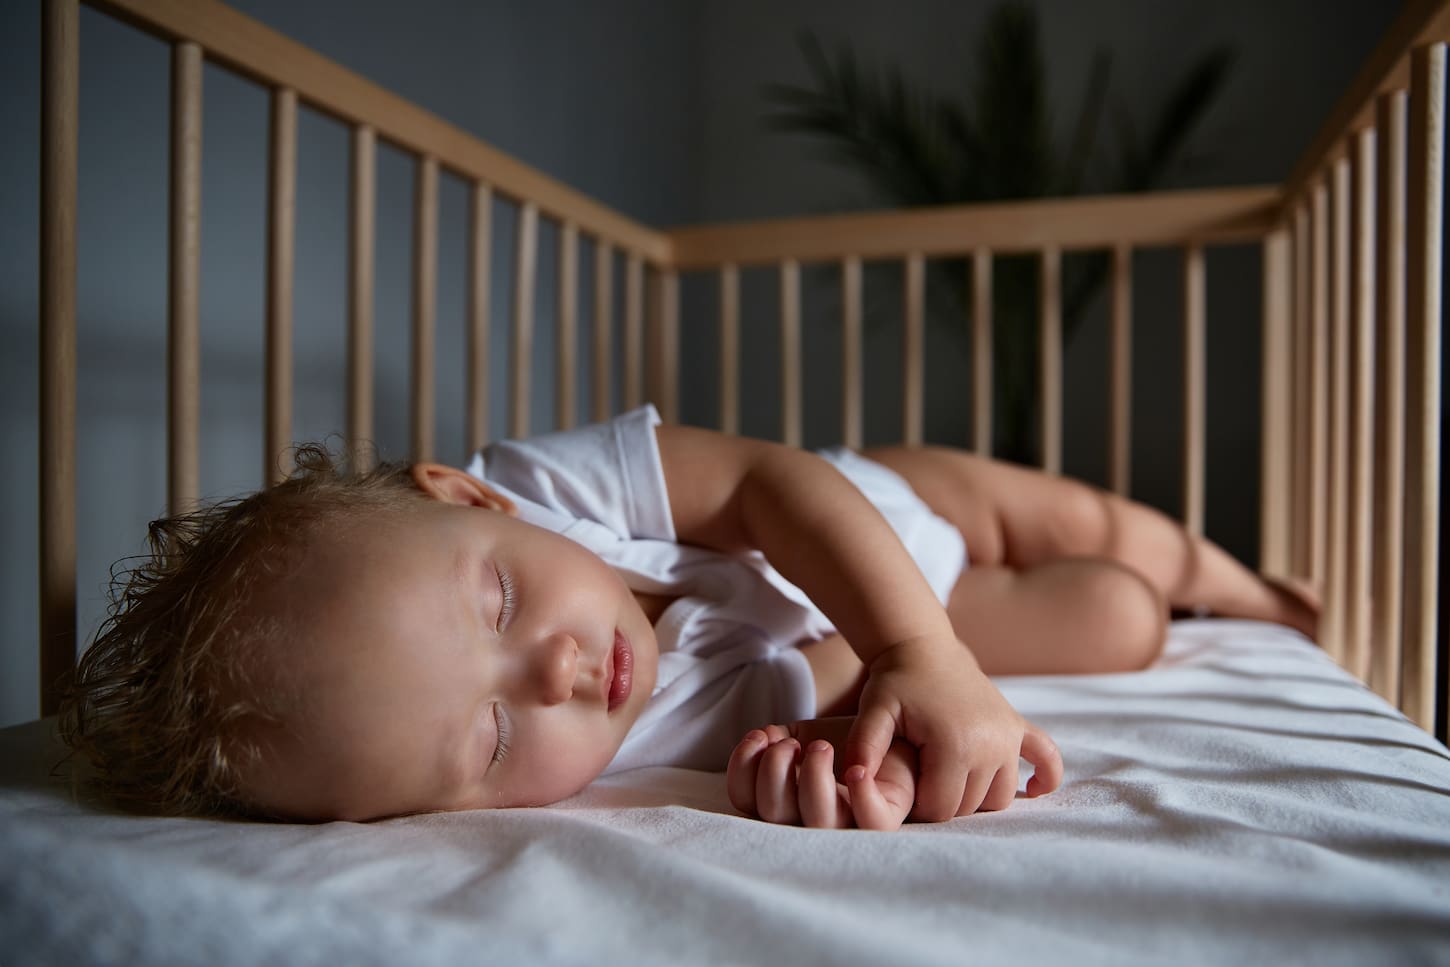 An image of a cute baby sleeping in a cradle.